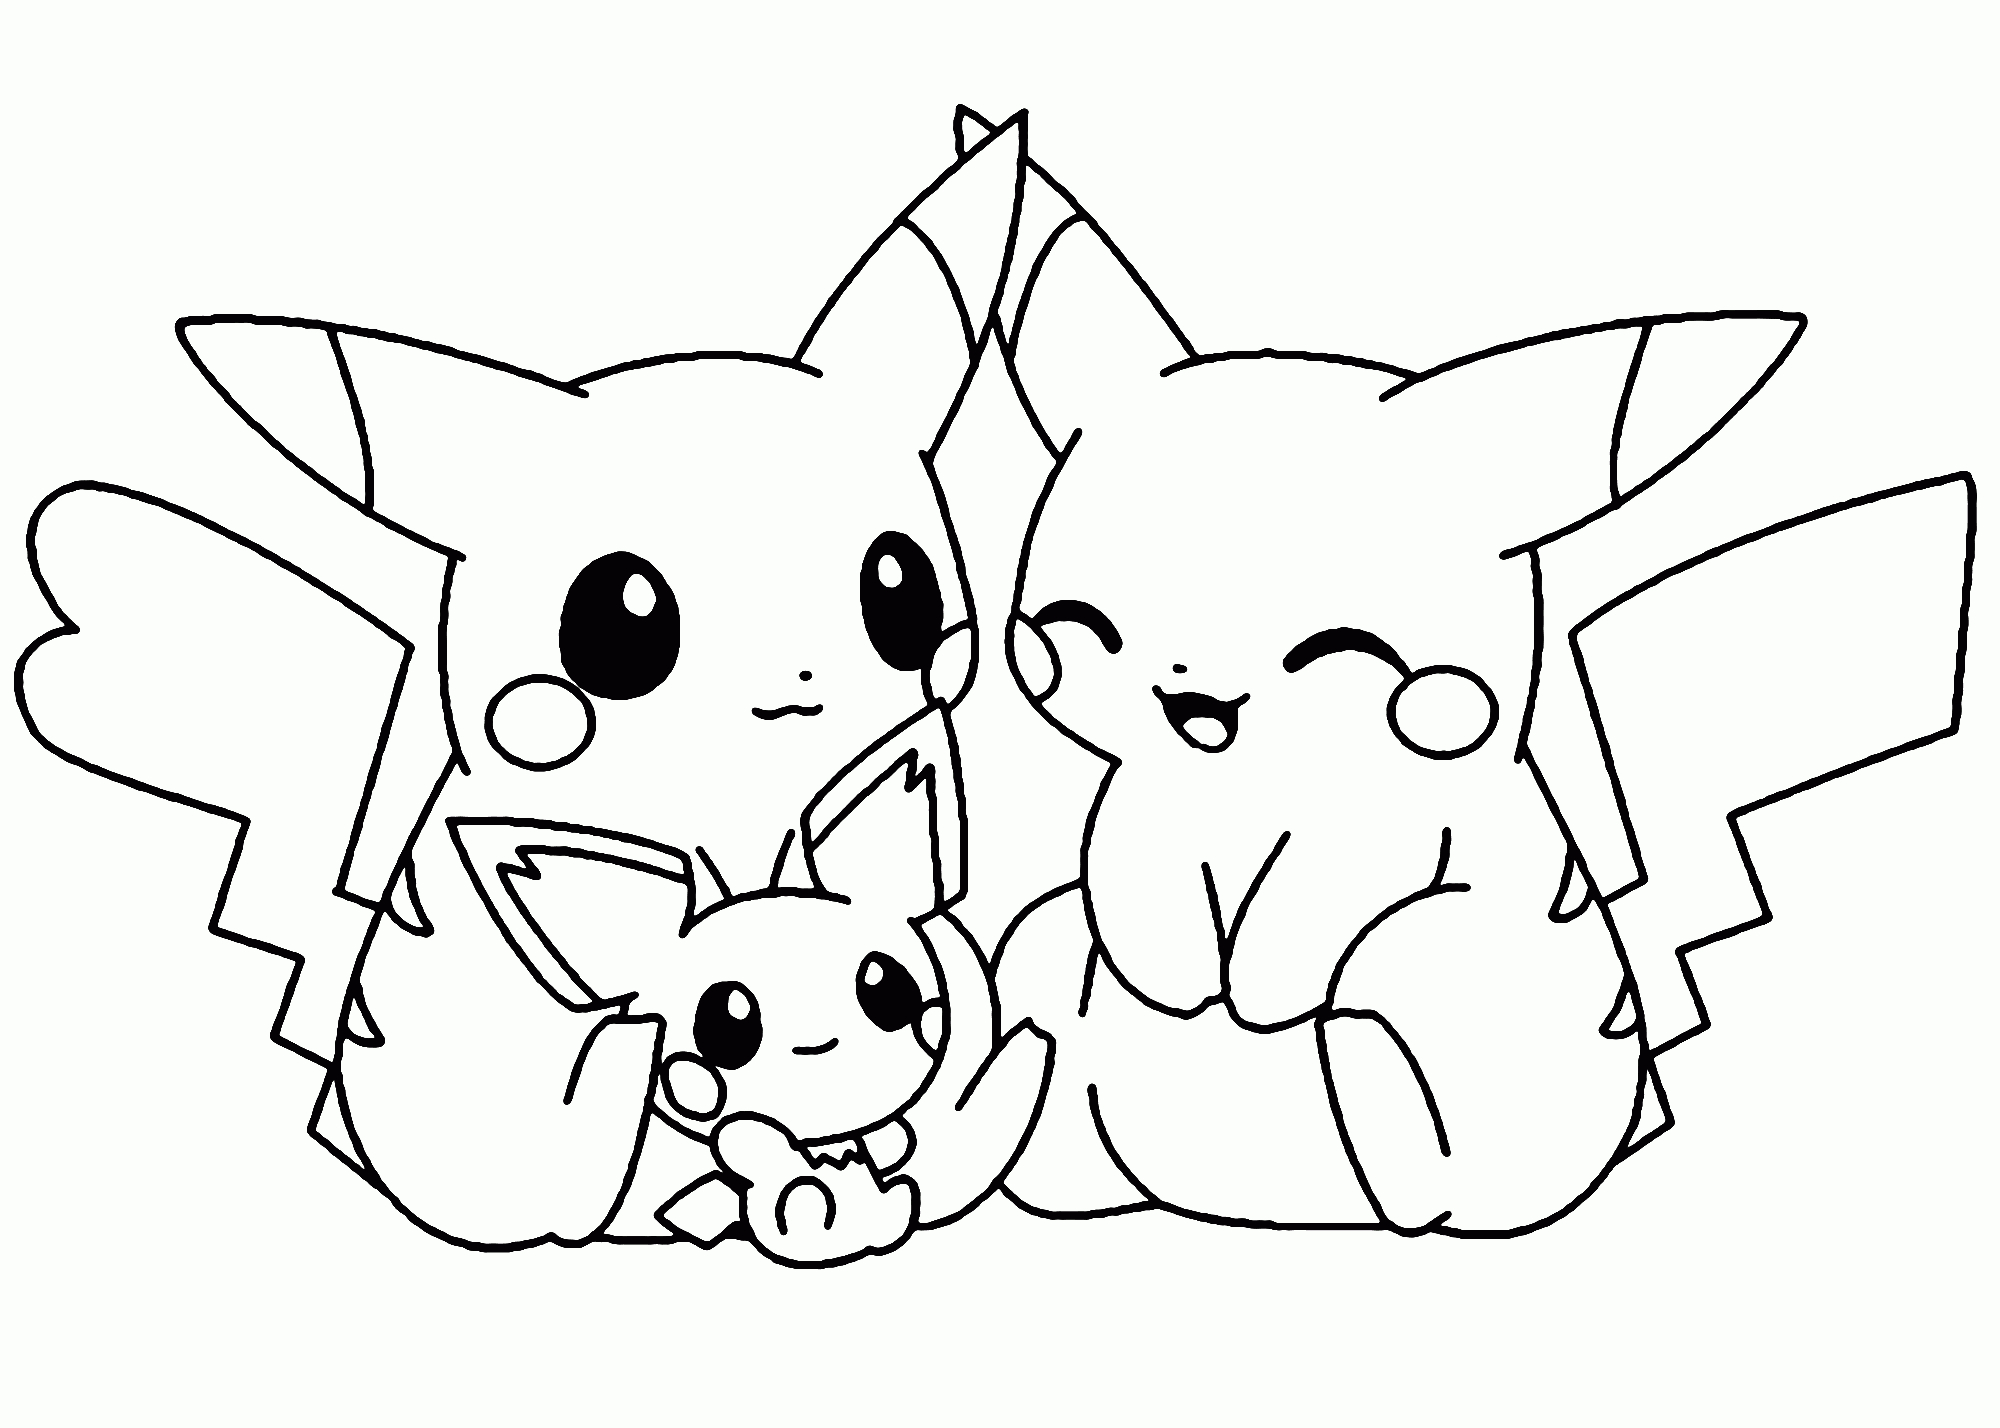 27 Pokemon Coloring Pages: Printable High Res (Updated) - Print Color Craft avec Coloriage Kawaii Pikachu